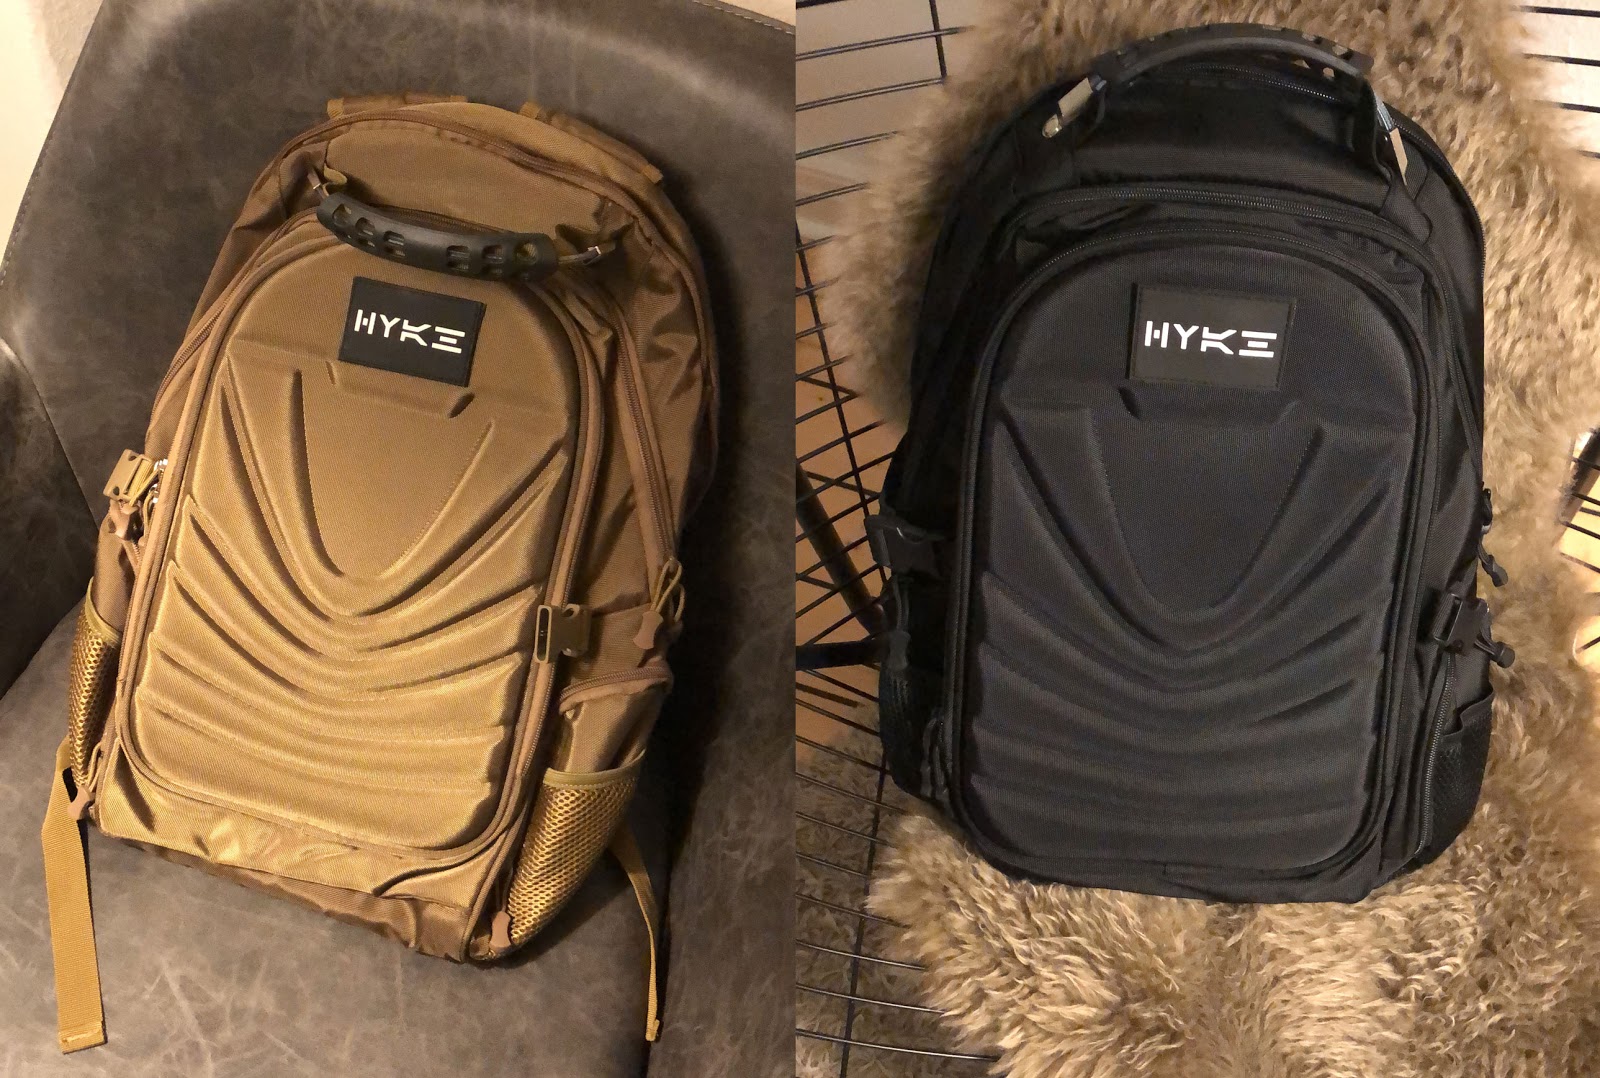 Picture showing backpacks with logos on them